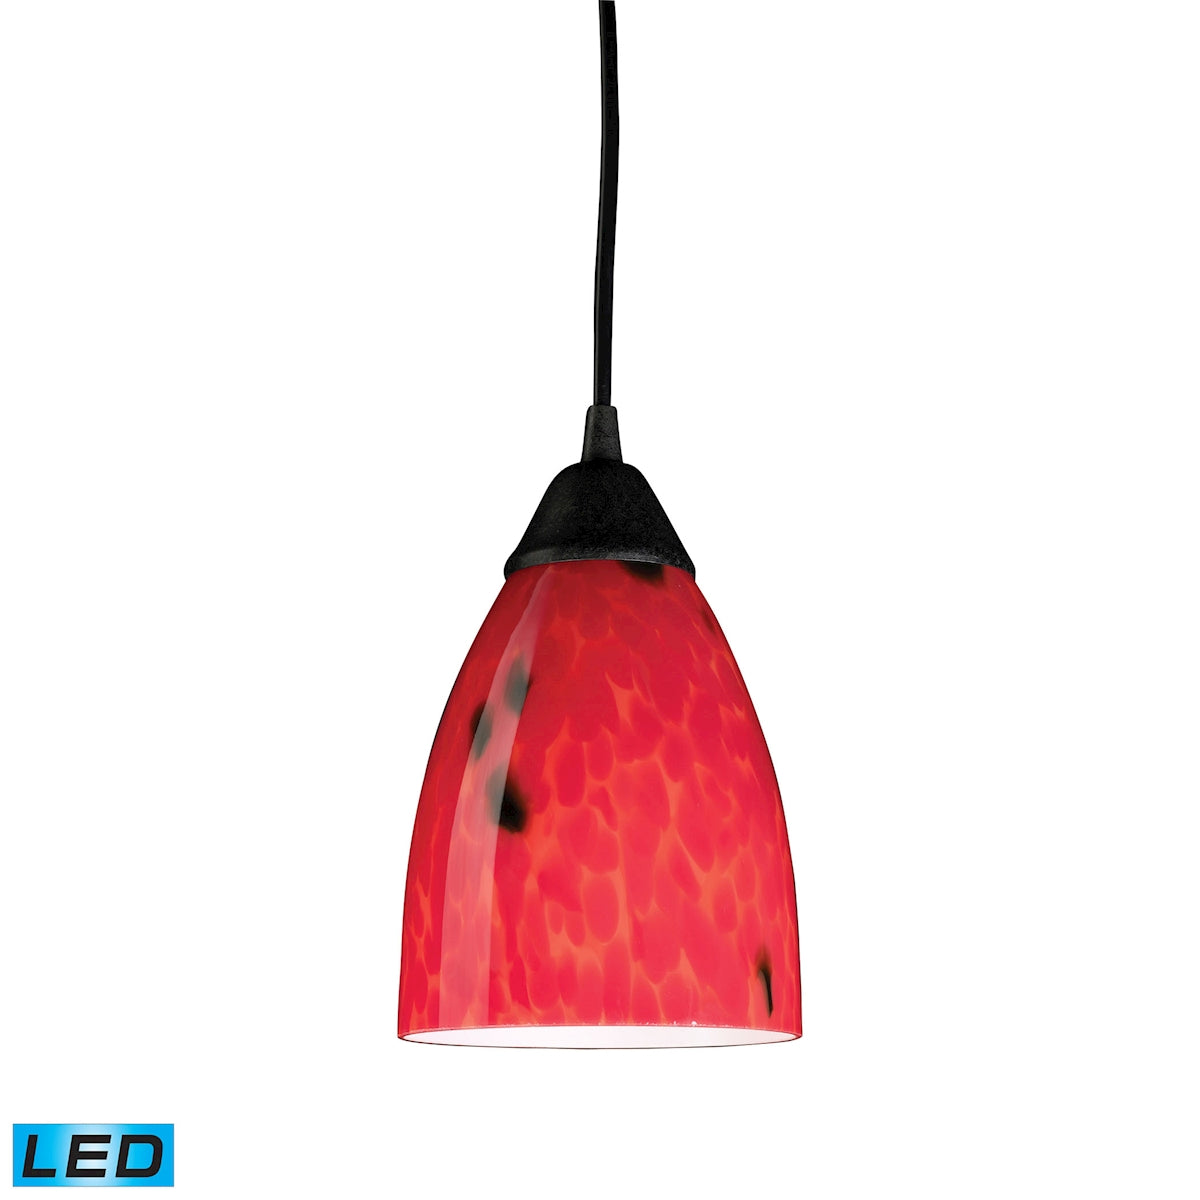 ELK Lighting 406-1FR-LED Classico 1-Light Mini Pendant in Dark Rust with Fire Red Glass - Includes LED Bulb